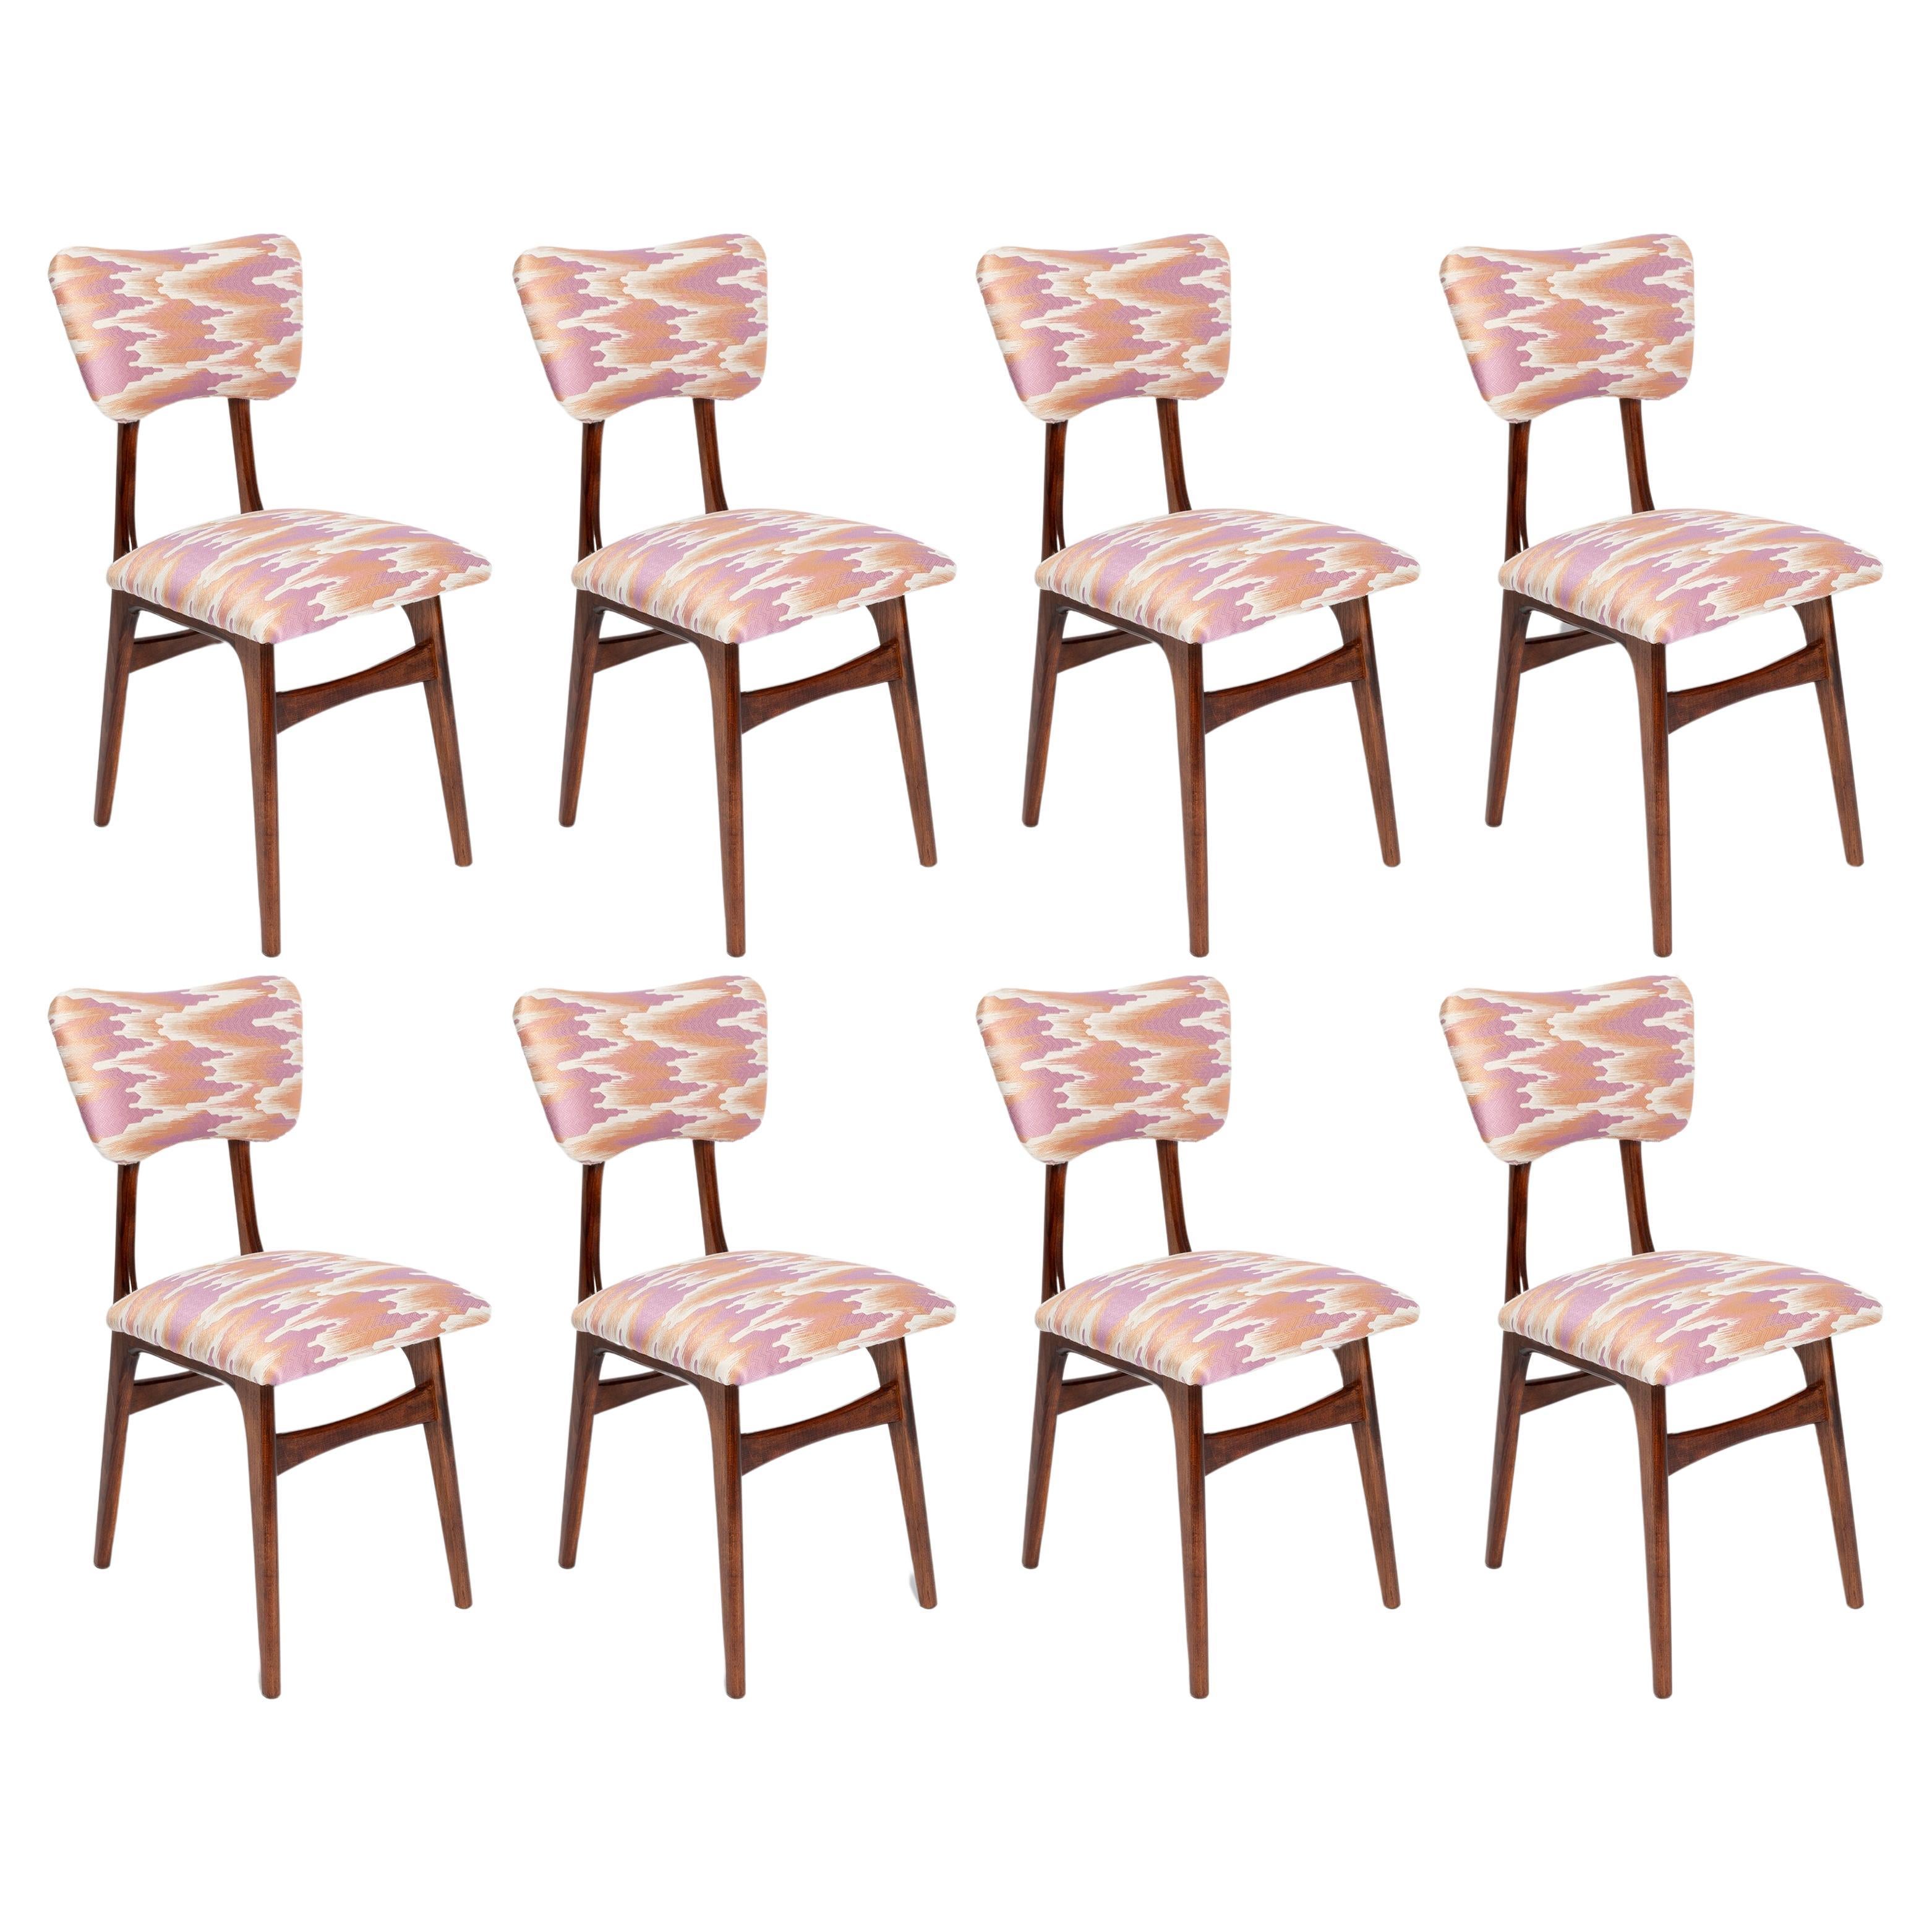 Eight Mid Century Butterfly Chairs, Fandango Jacquard, Dark Wood, Europe, 1960s For Sale